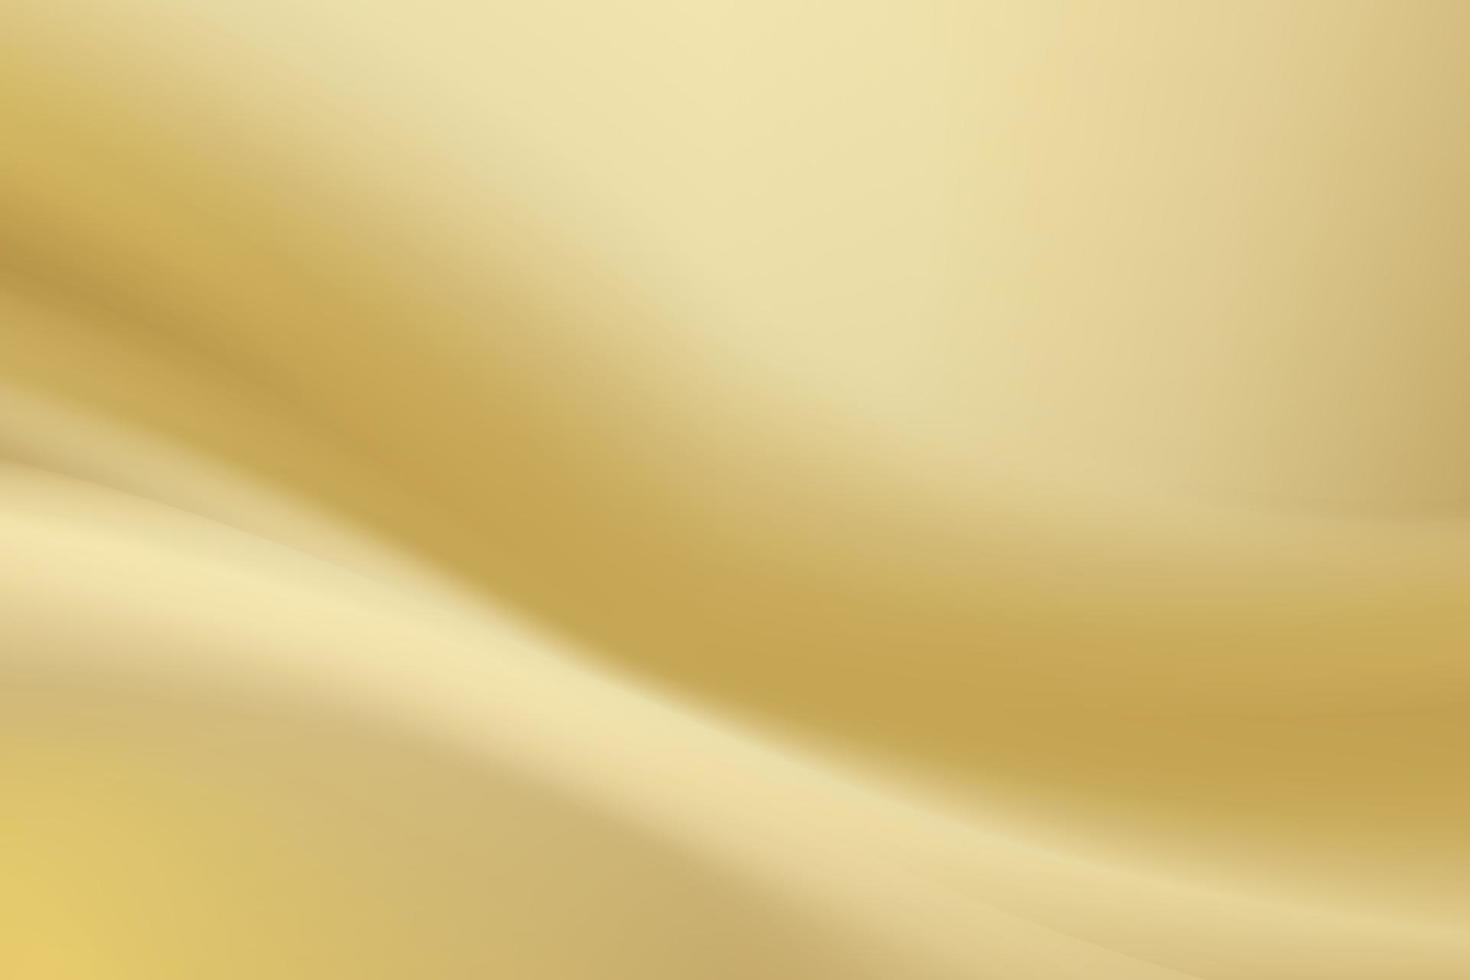 Gold background with sunlight. Vector illustration. Eps10